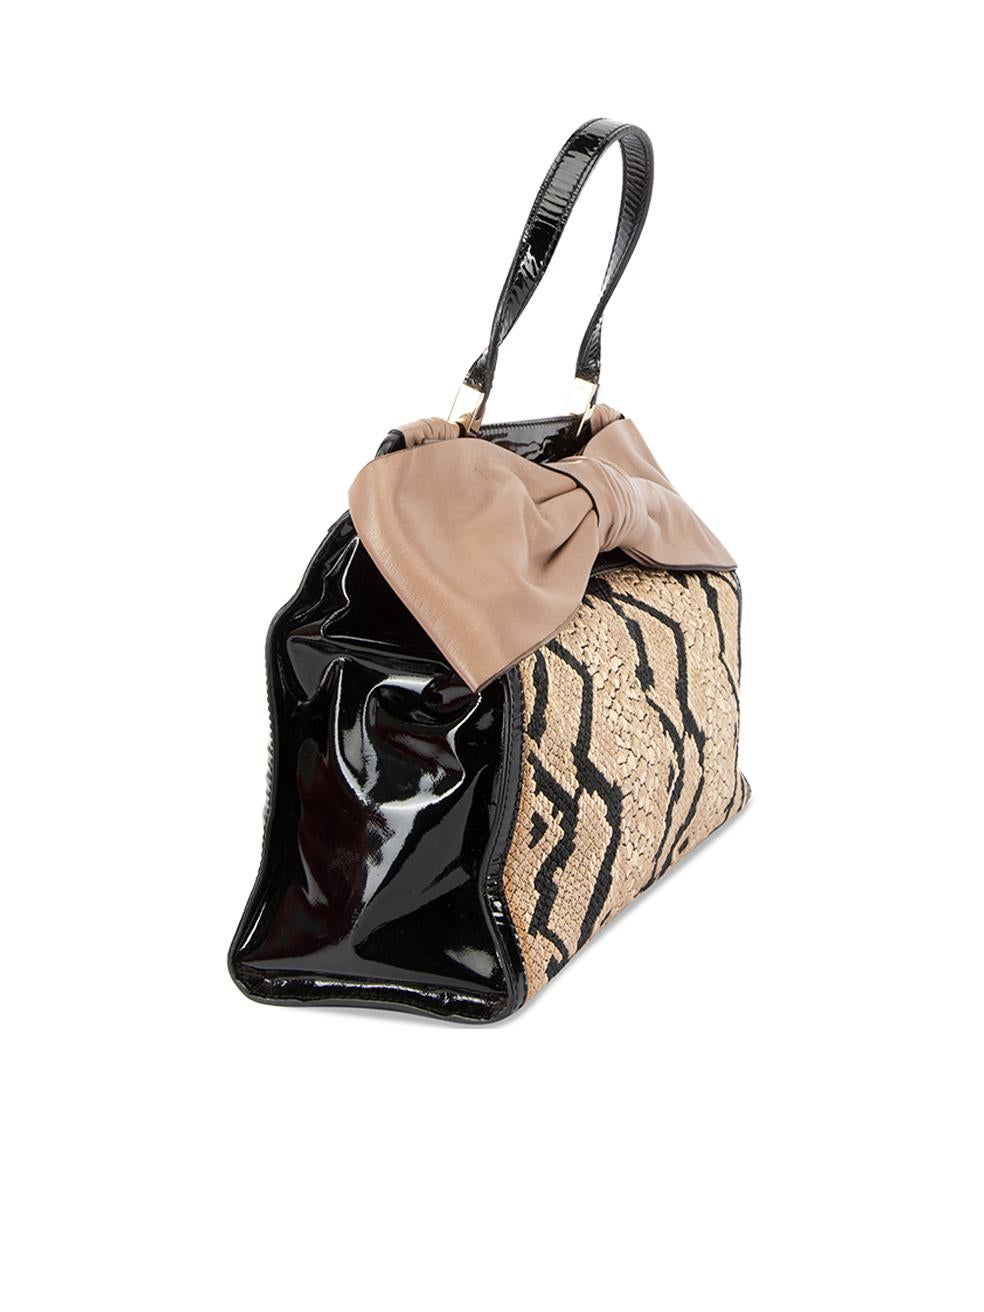 CONDITION is Very good. Minimal wear to bag is evident. Light creasing can be seen to patent leather exterior material on this used Valentino designer resale item. This item comes with original dustbag.   Details  Multicolour Leather, patent leather